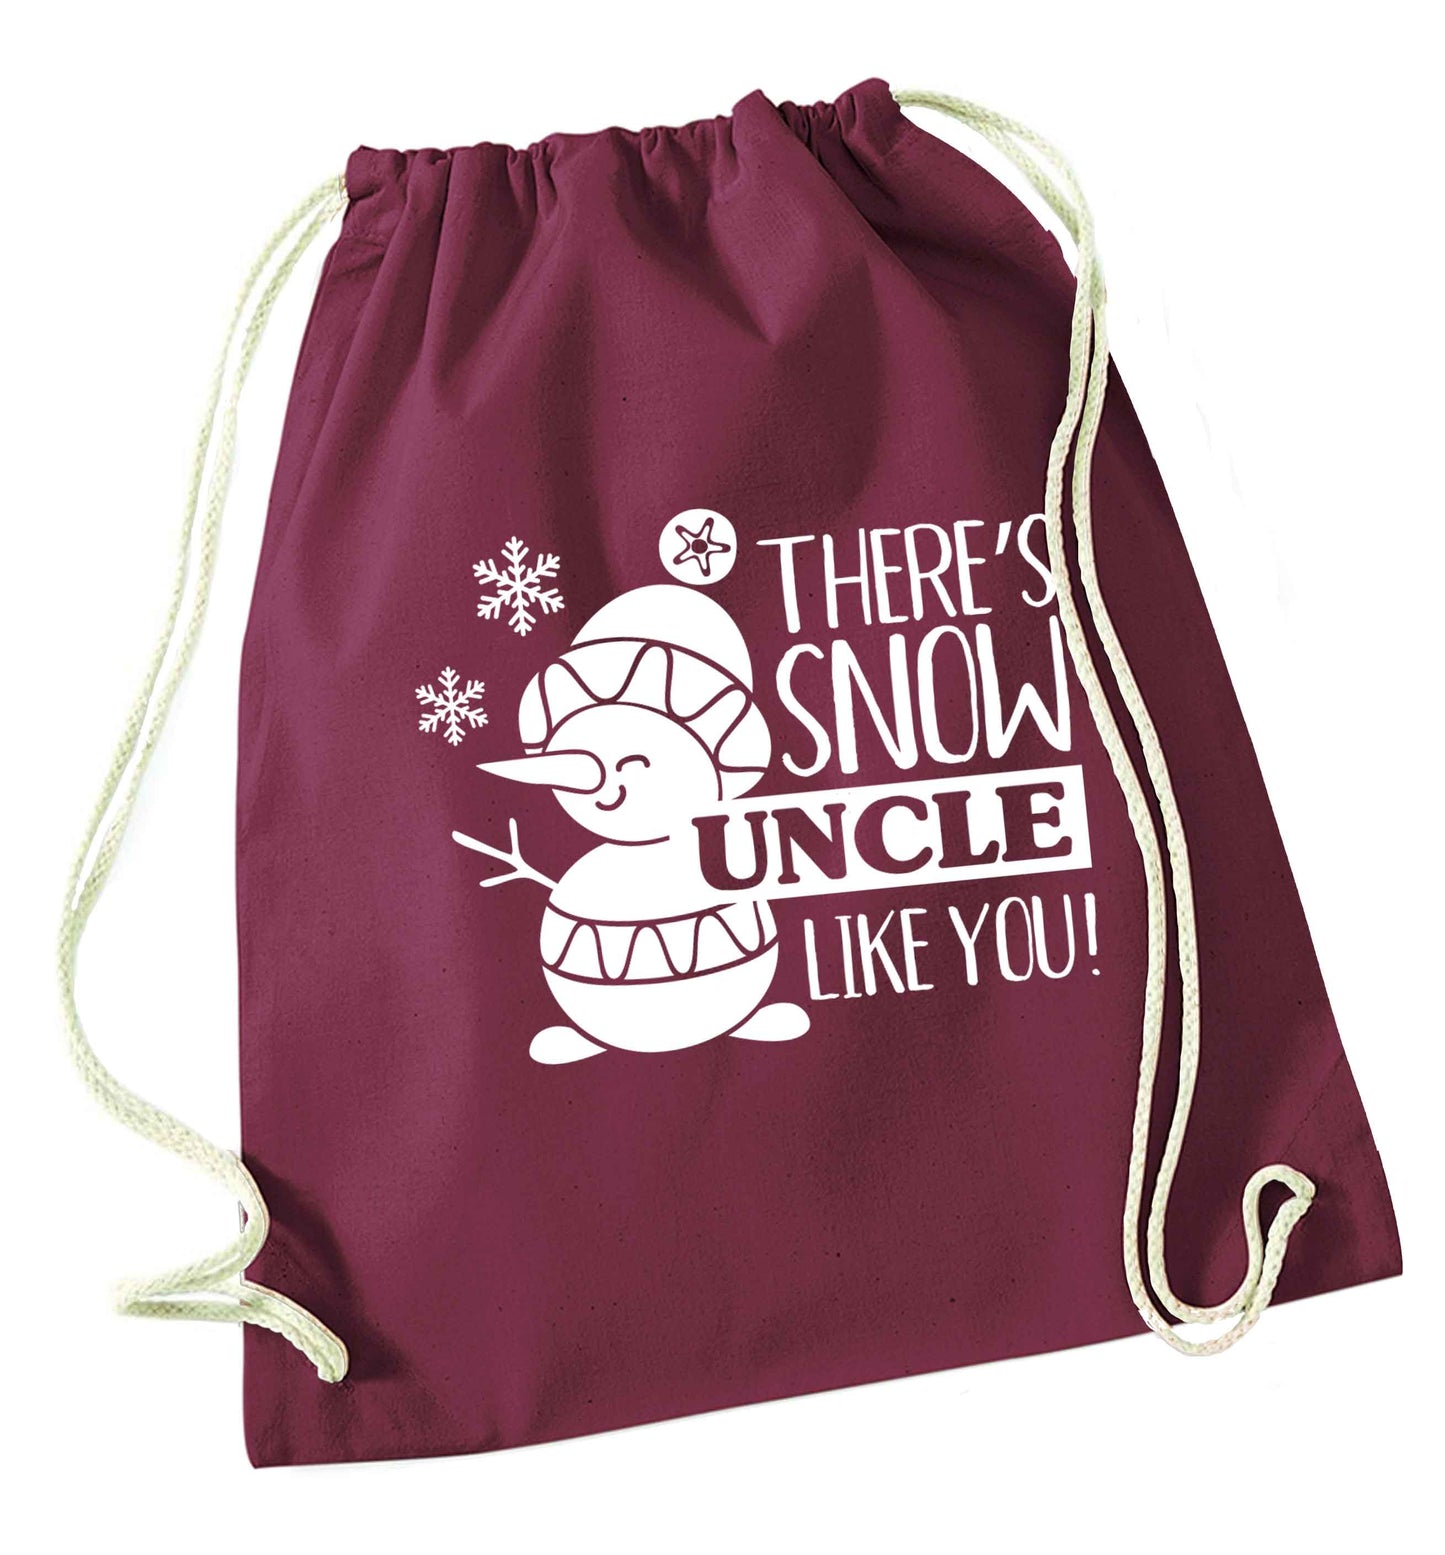 There's snow uncle like you maroon drawstring bag